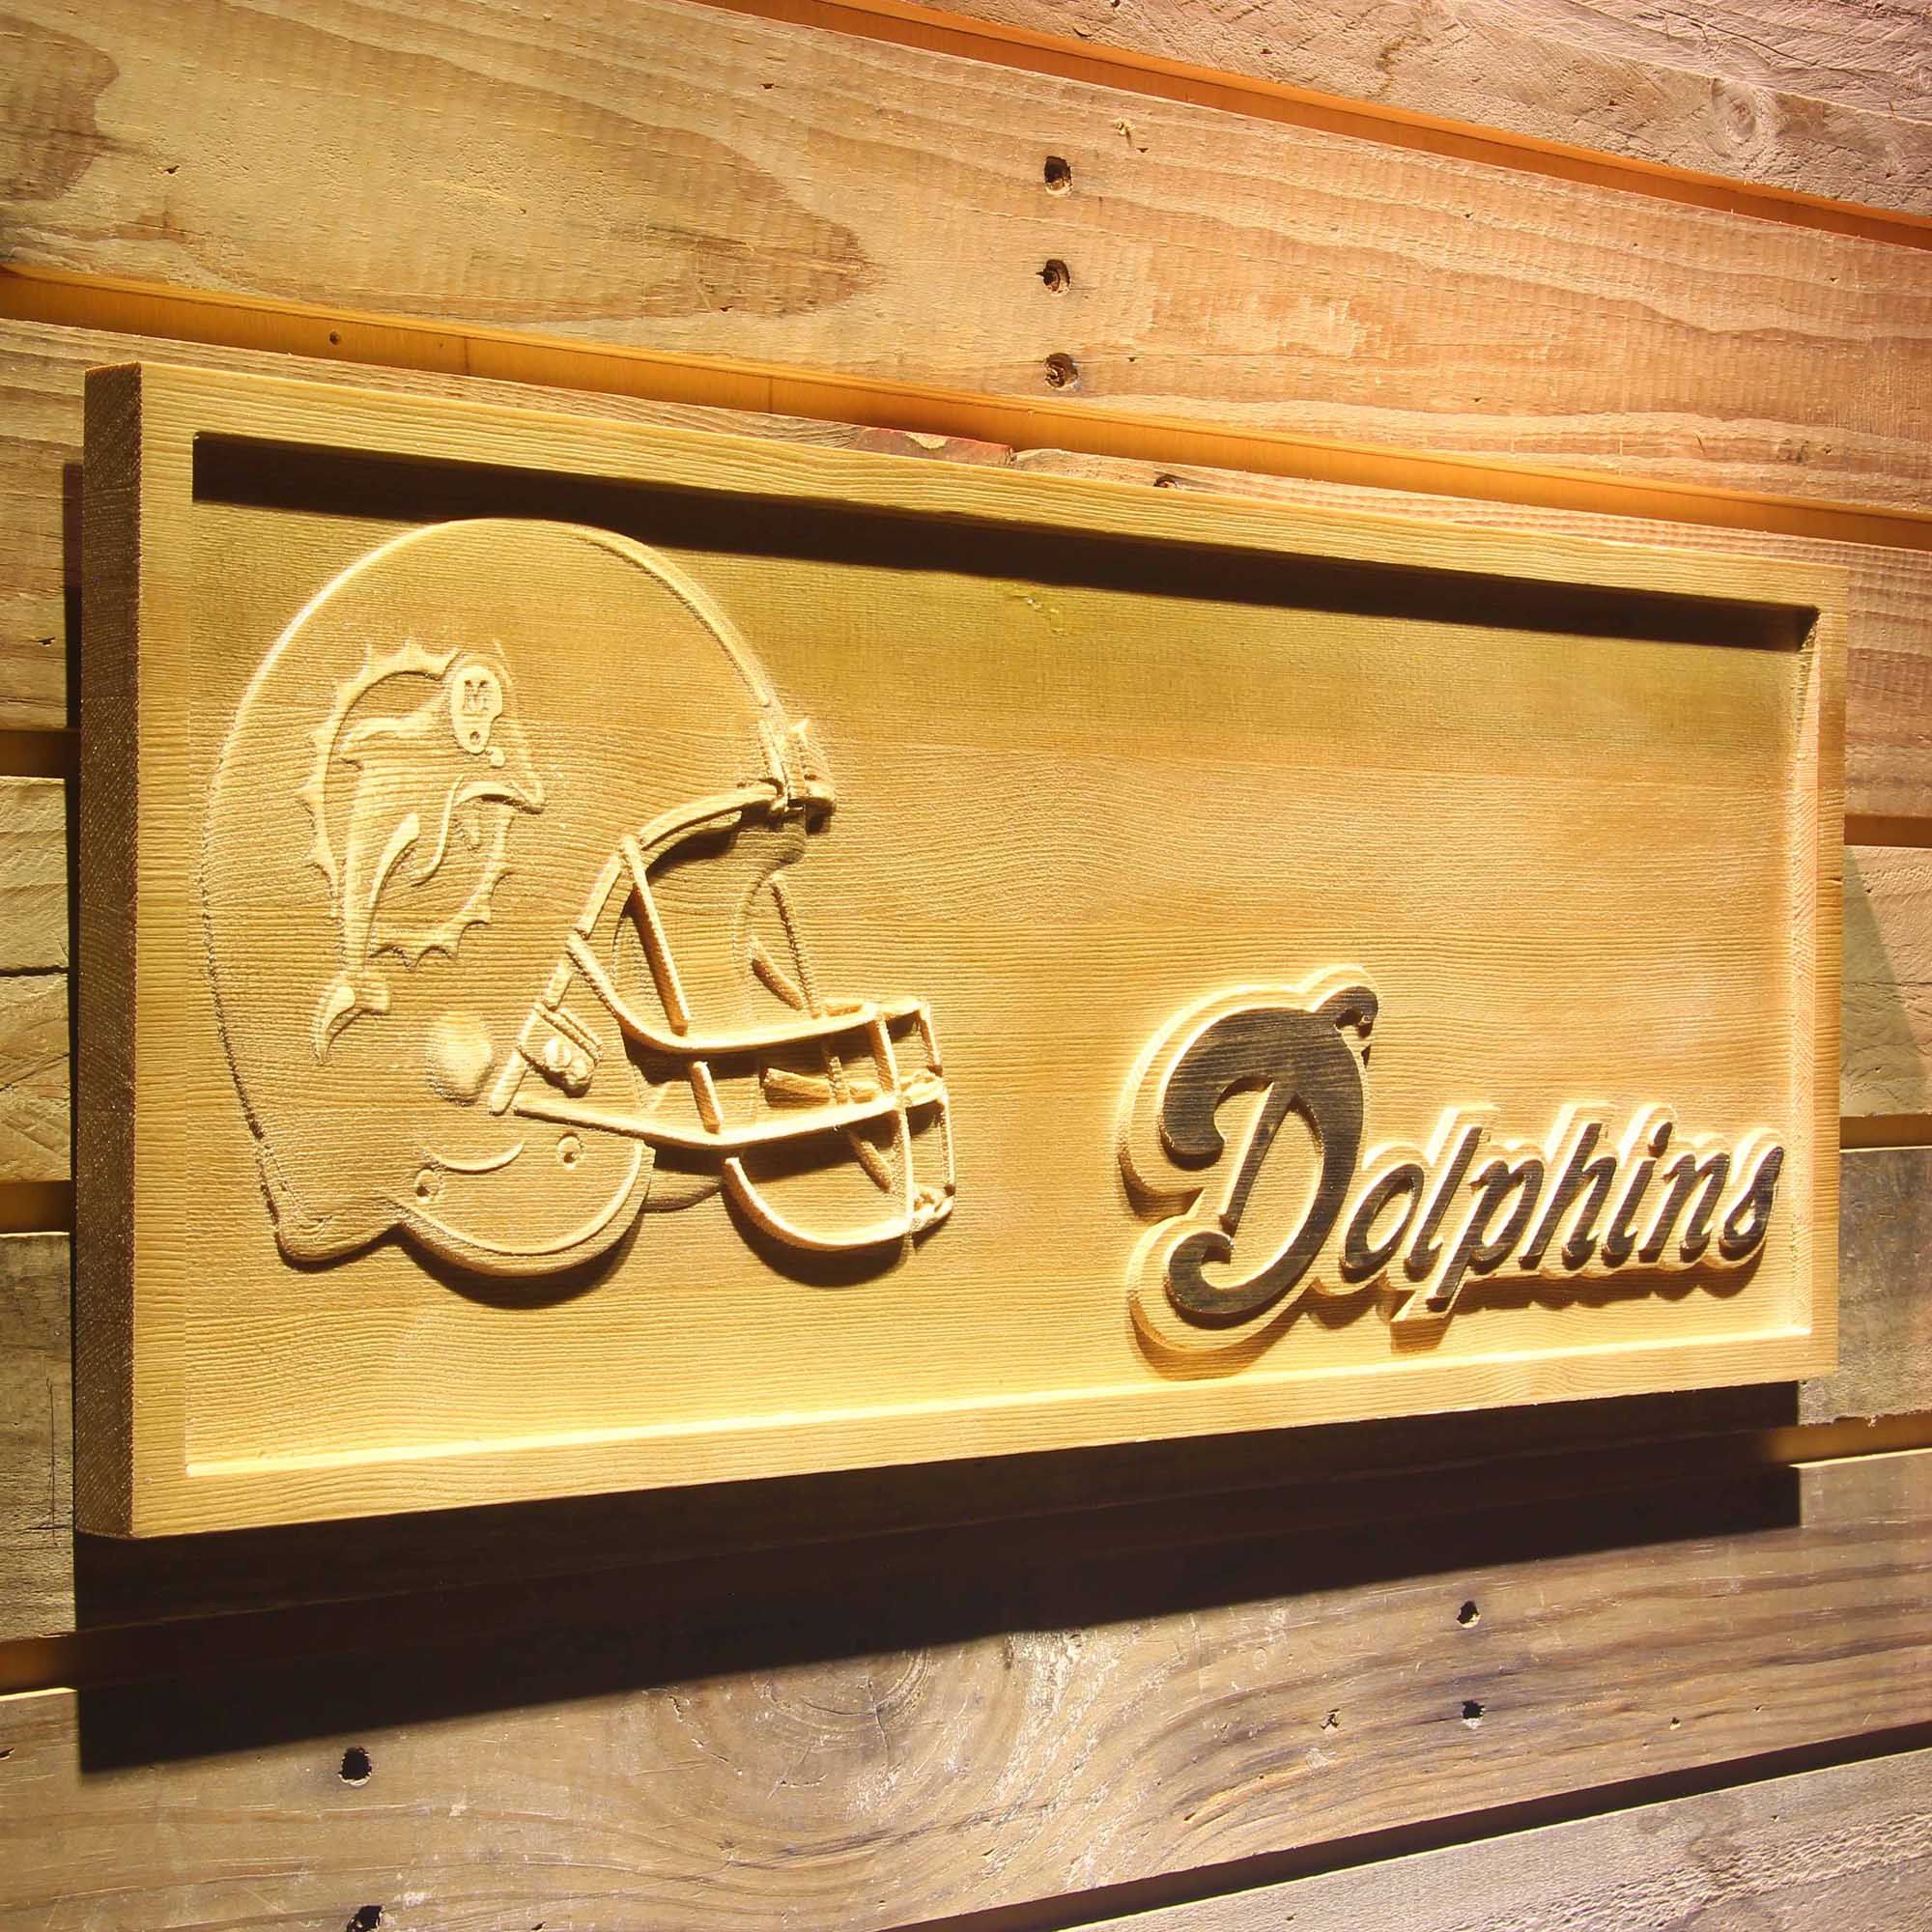 Miami Dolphins 3D Solid Wooden Craving Sign